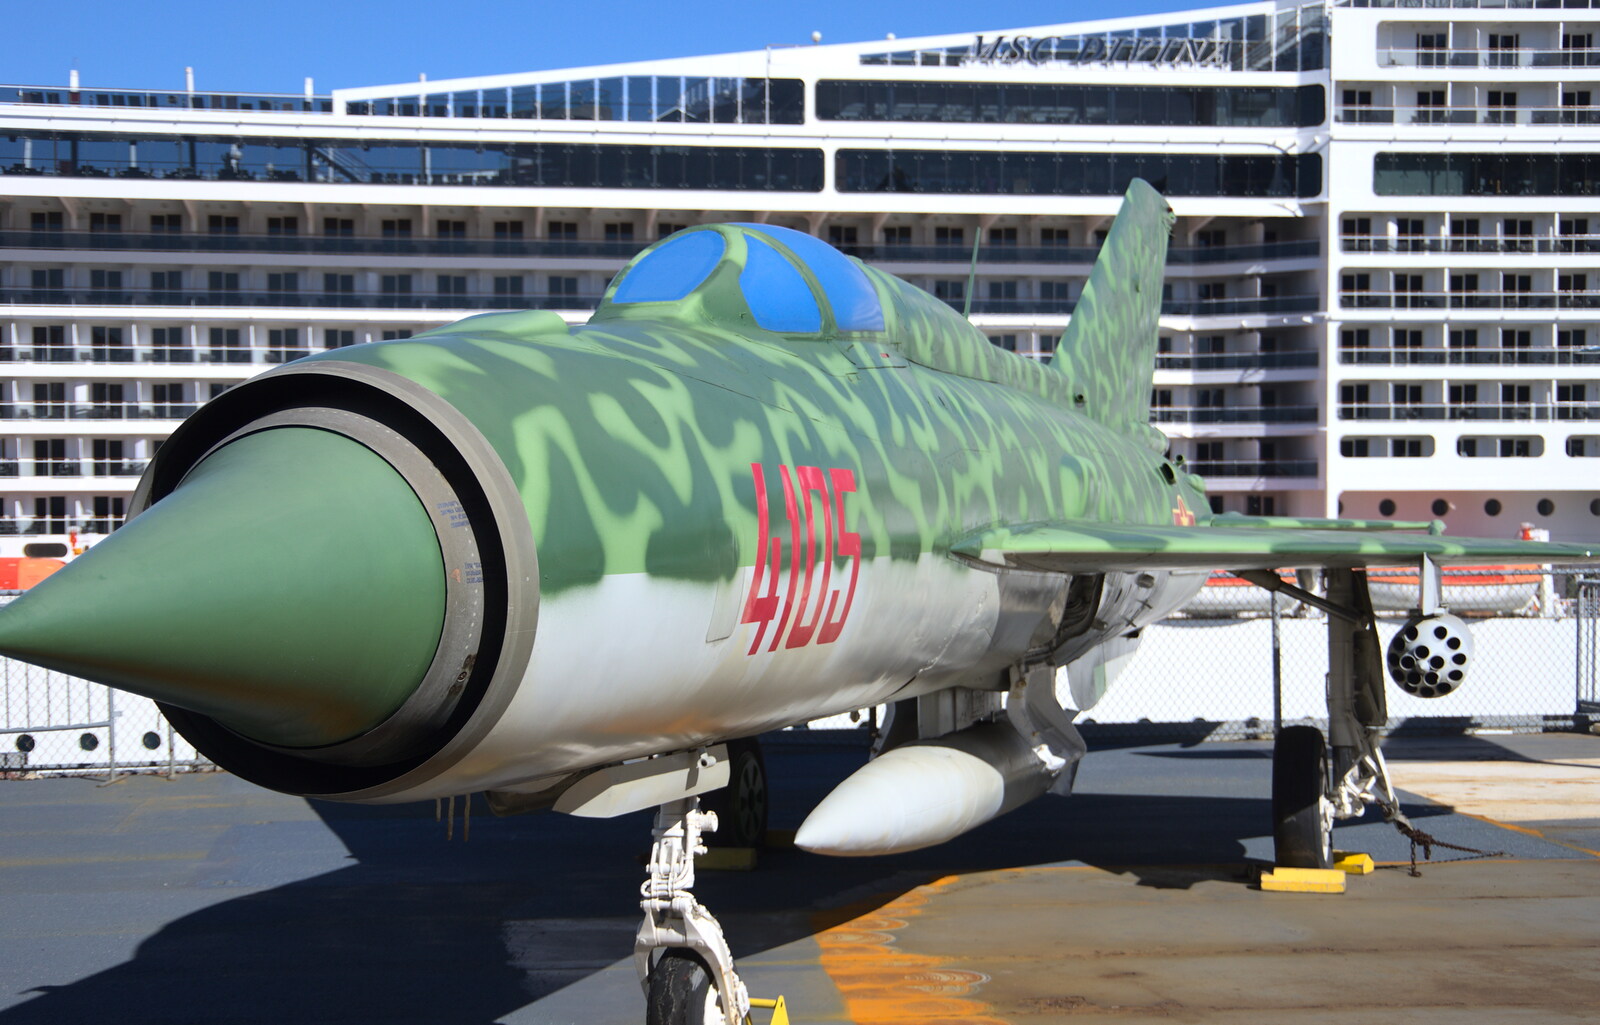 A Russian MiG from Times Square, USS Intrepid and the High Line, Manhattan, New York - 25th October 2018